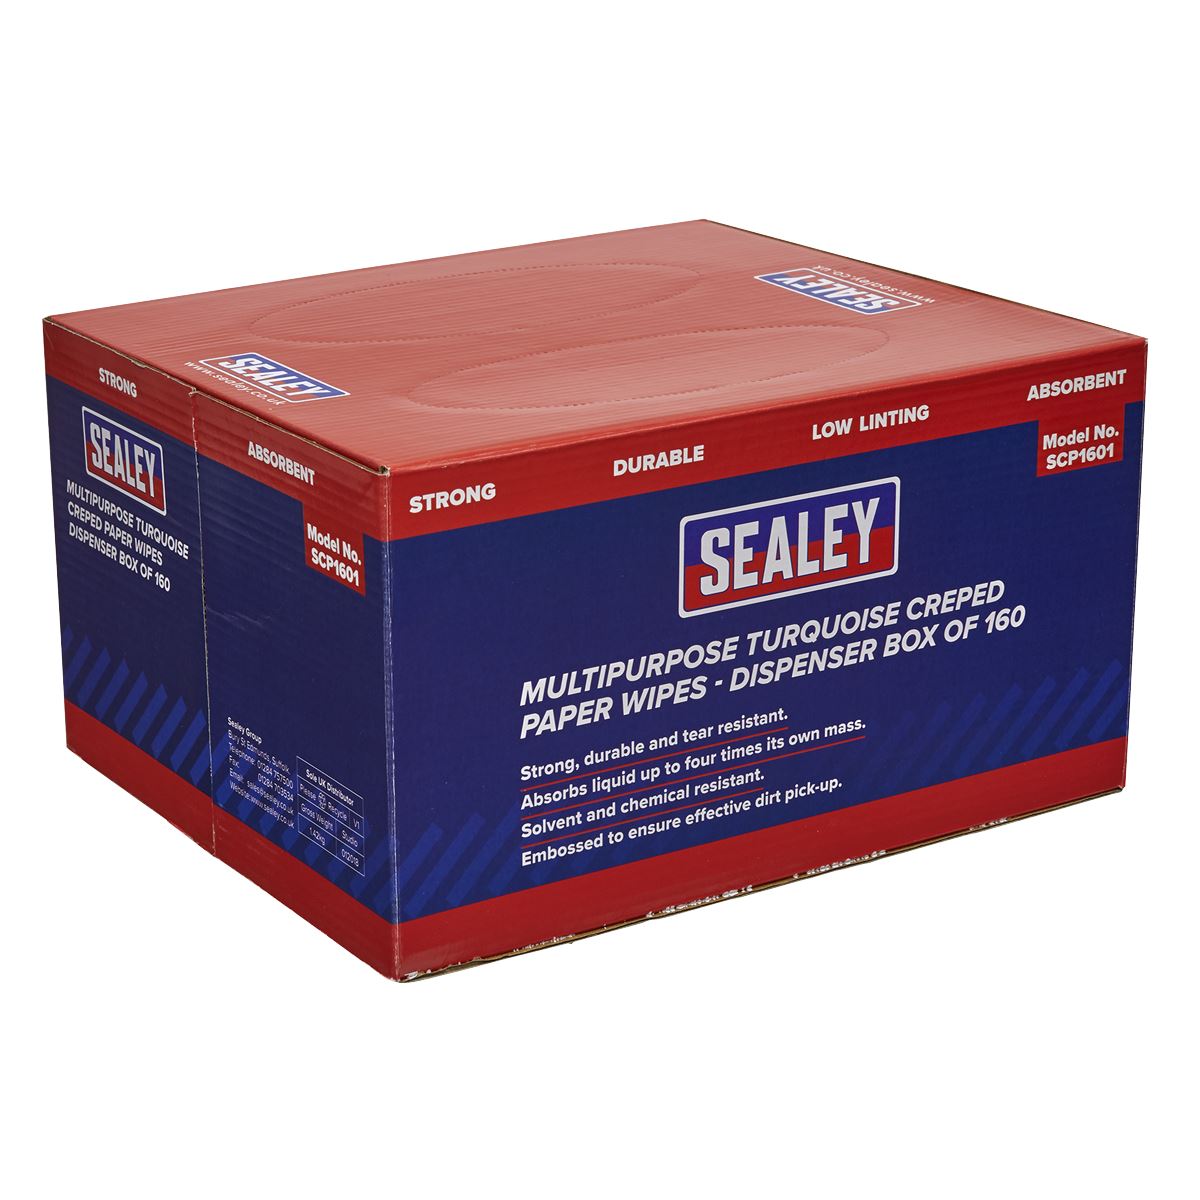 Sealey Multipurpose Paper Wipes in Dispenser Box - Creped Turquoise 69gsm 160 Sheets